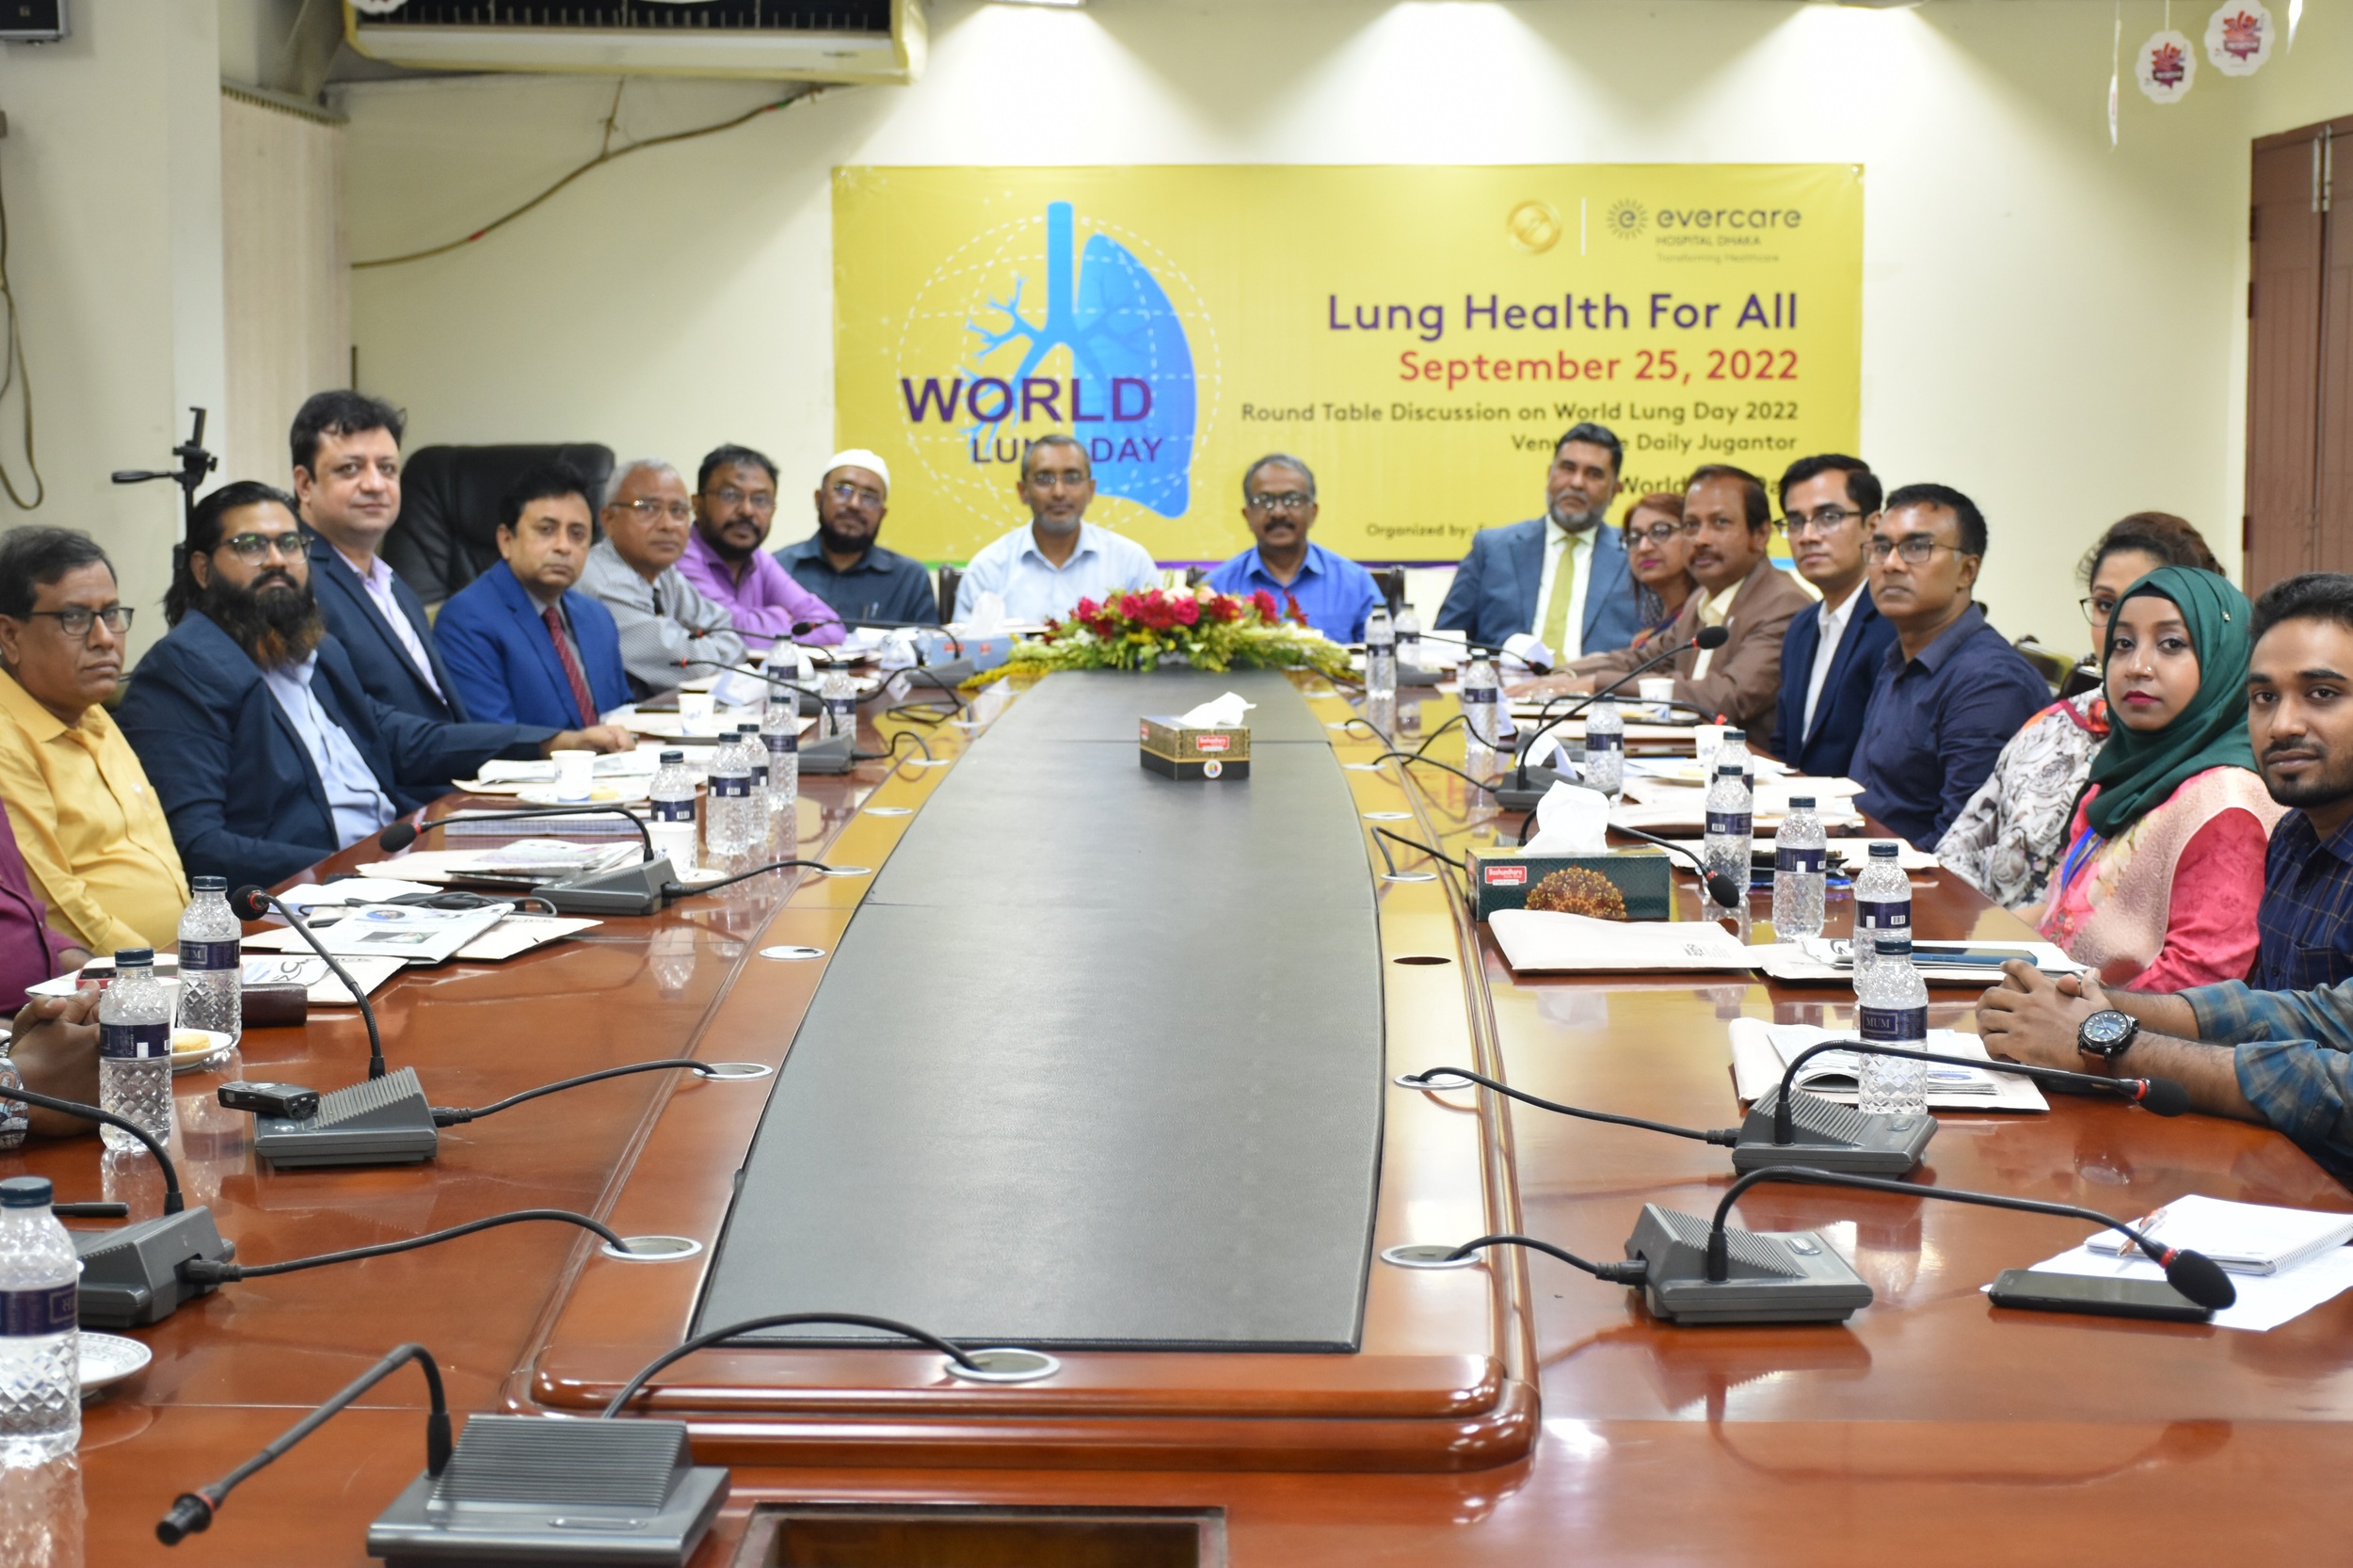 Evercare Hospital Dhaka's Roundtable on Lung Health for World Lung Day